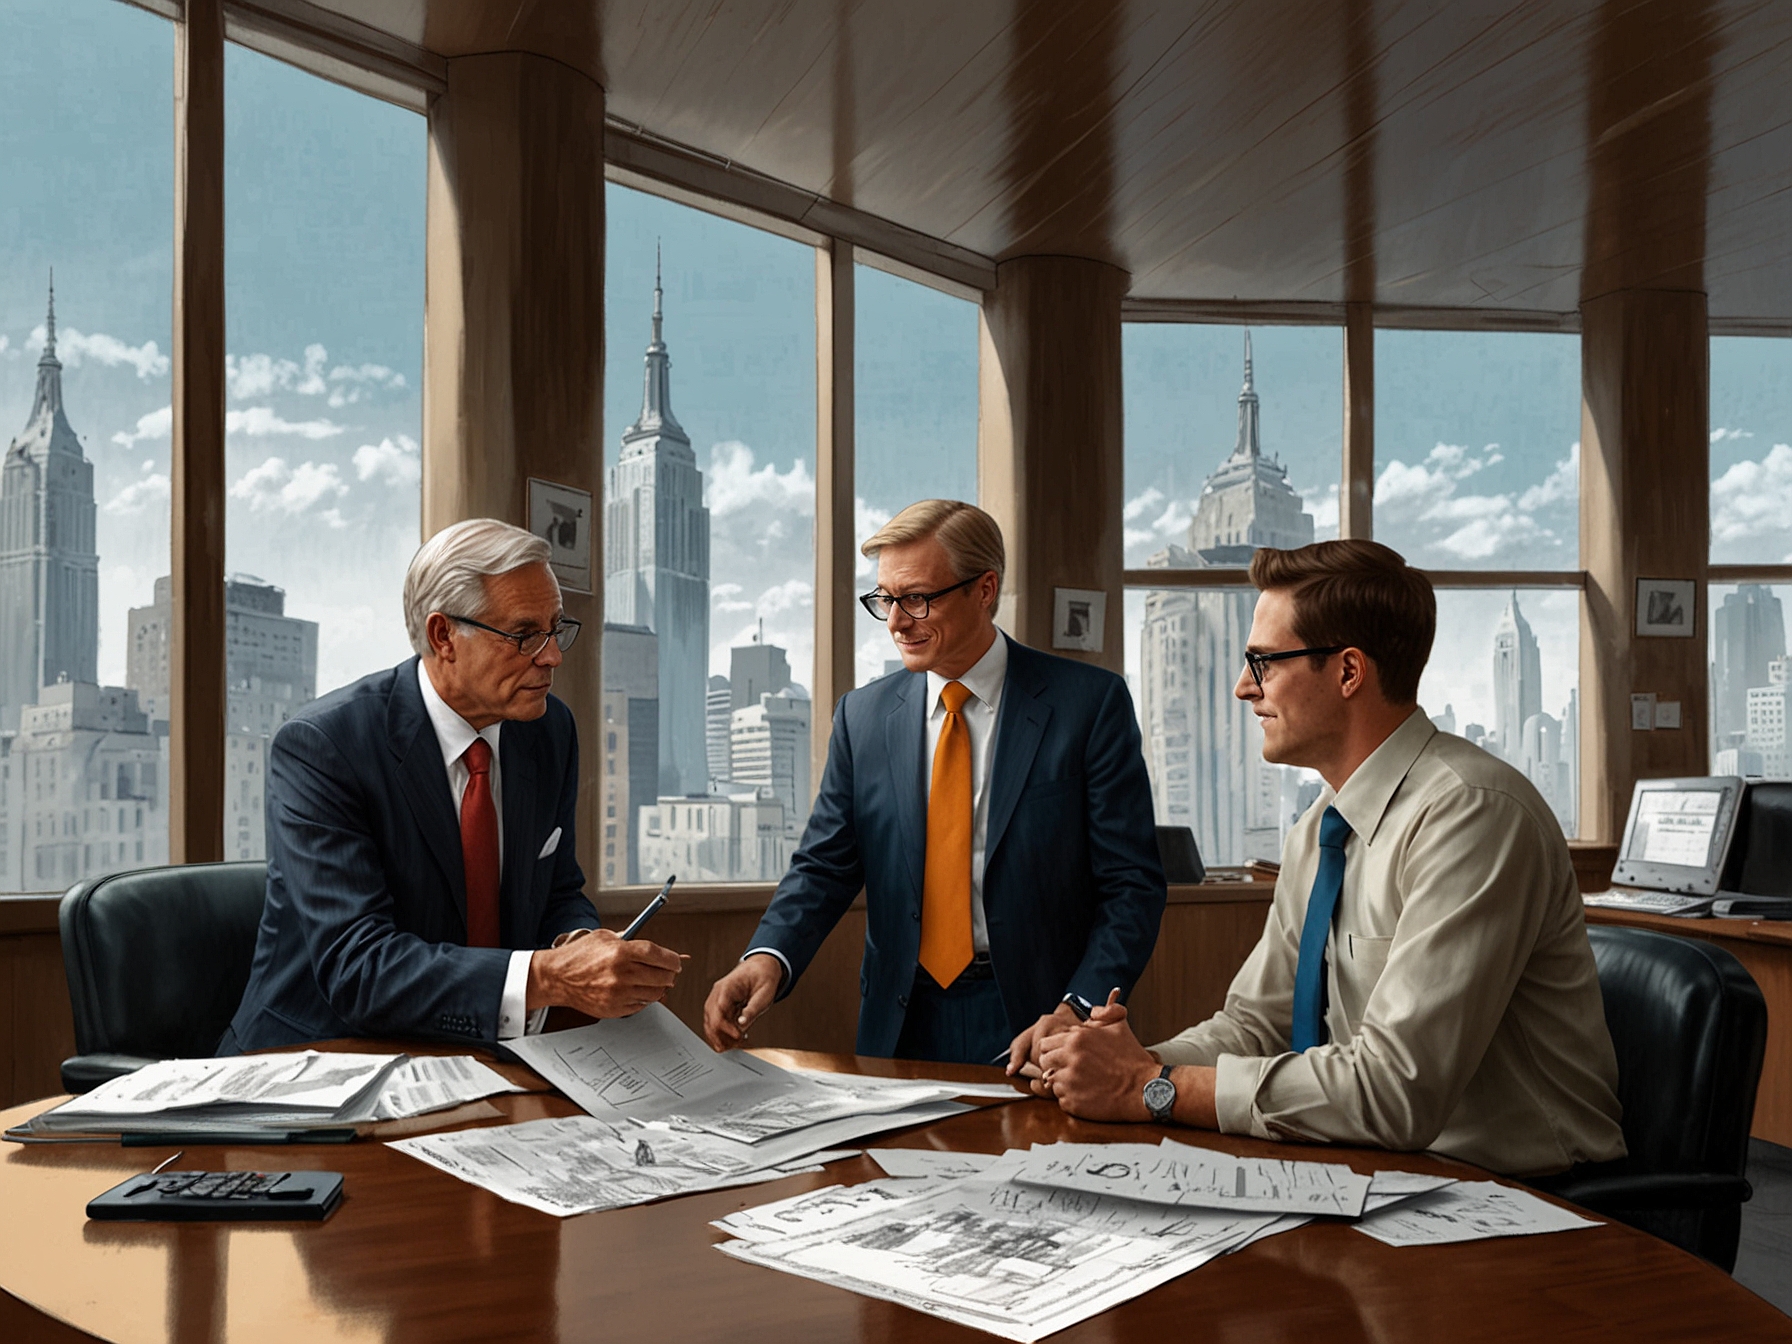 An illustration of Empire Petroleum's shareholders reviewing documents about the rights offering, showing engagement and interest in the investment opportunity.